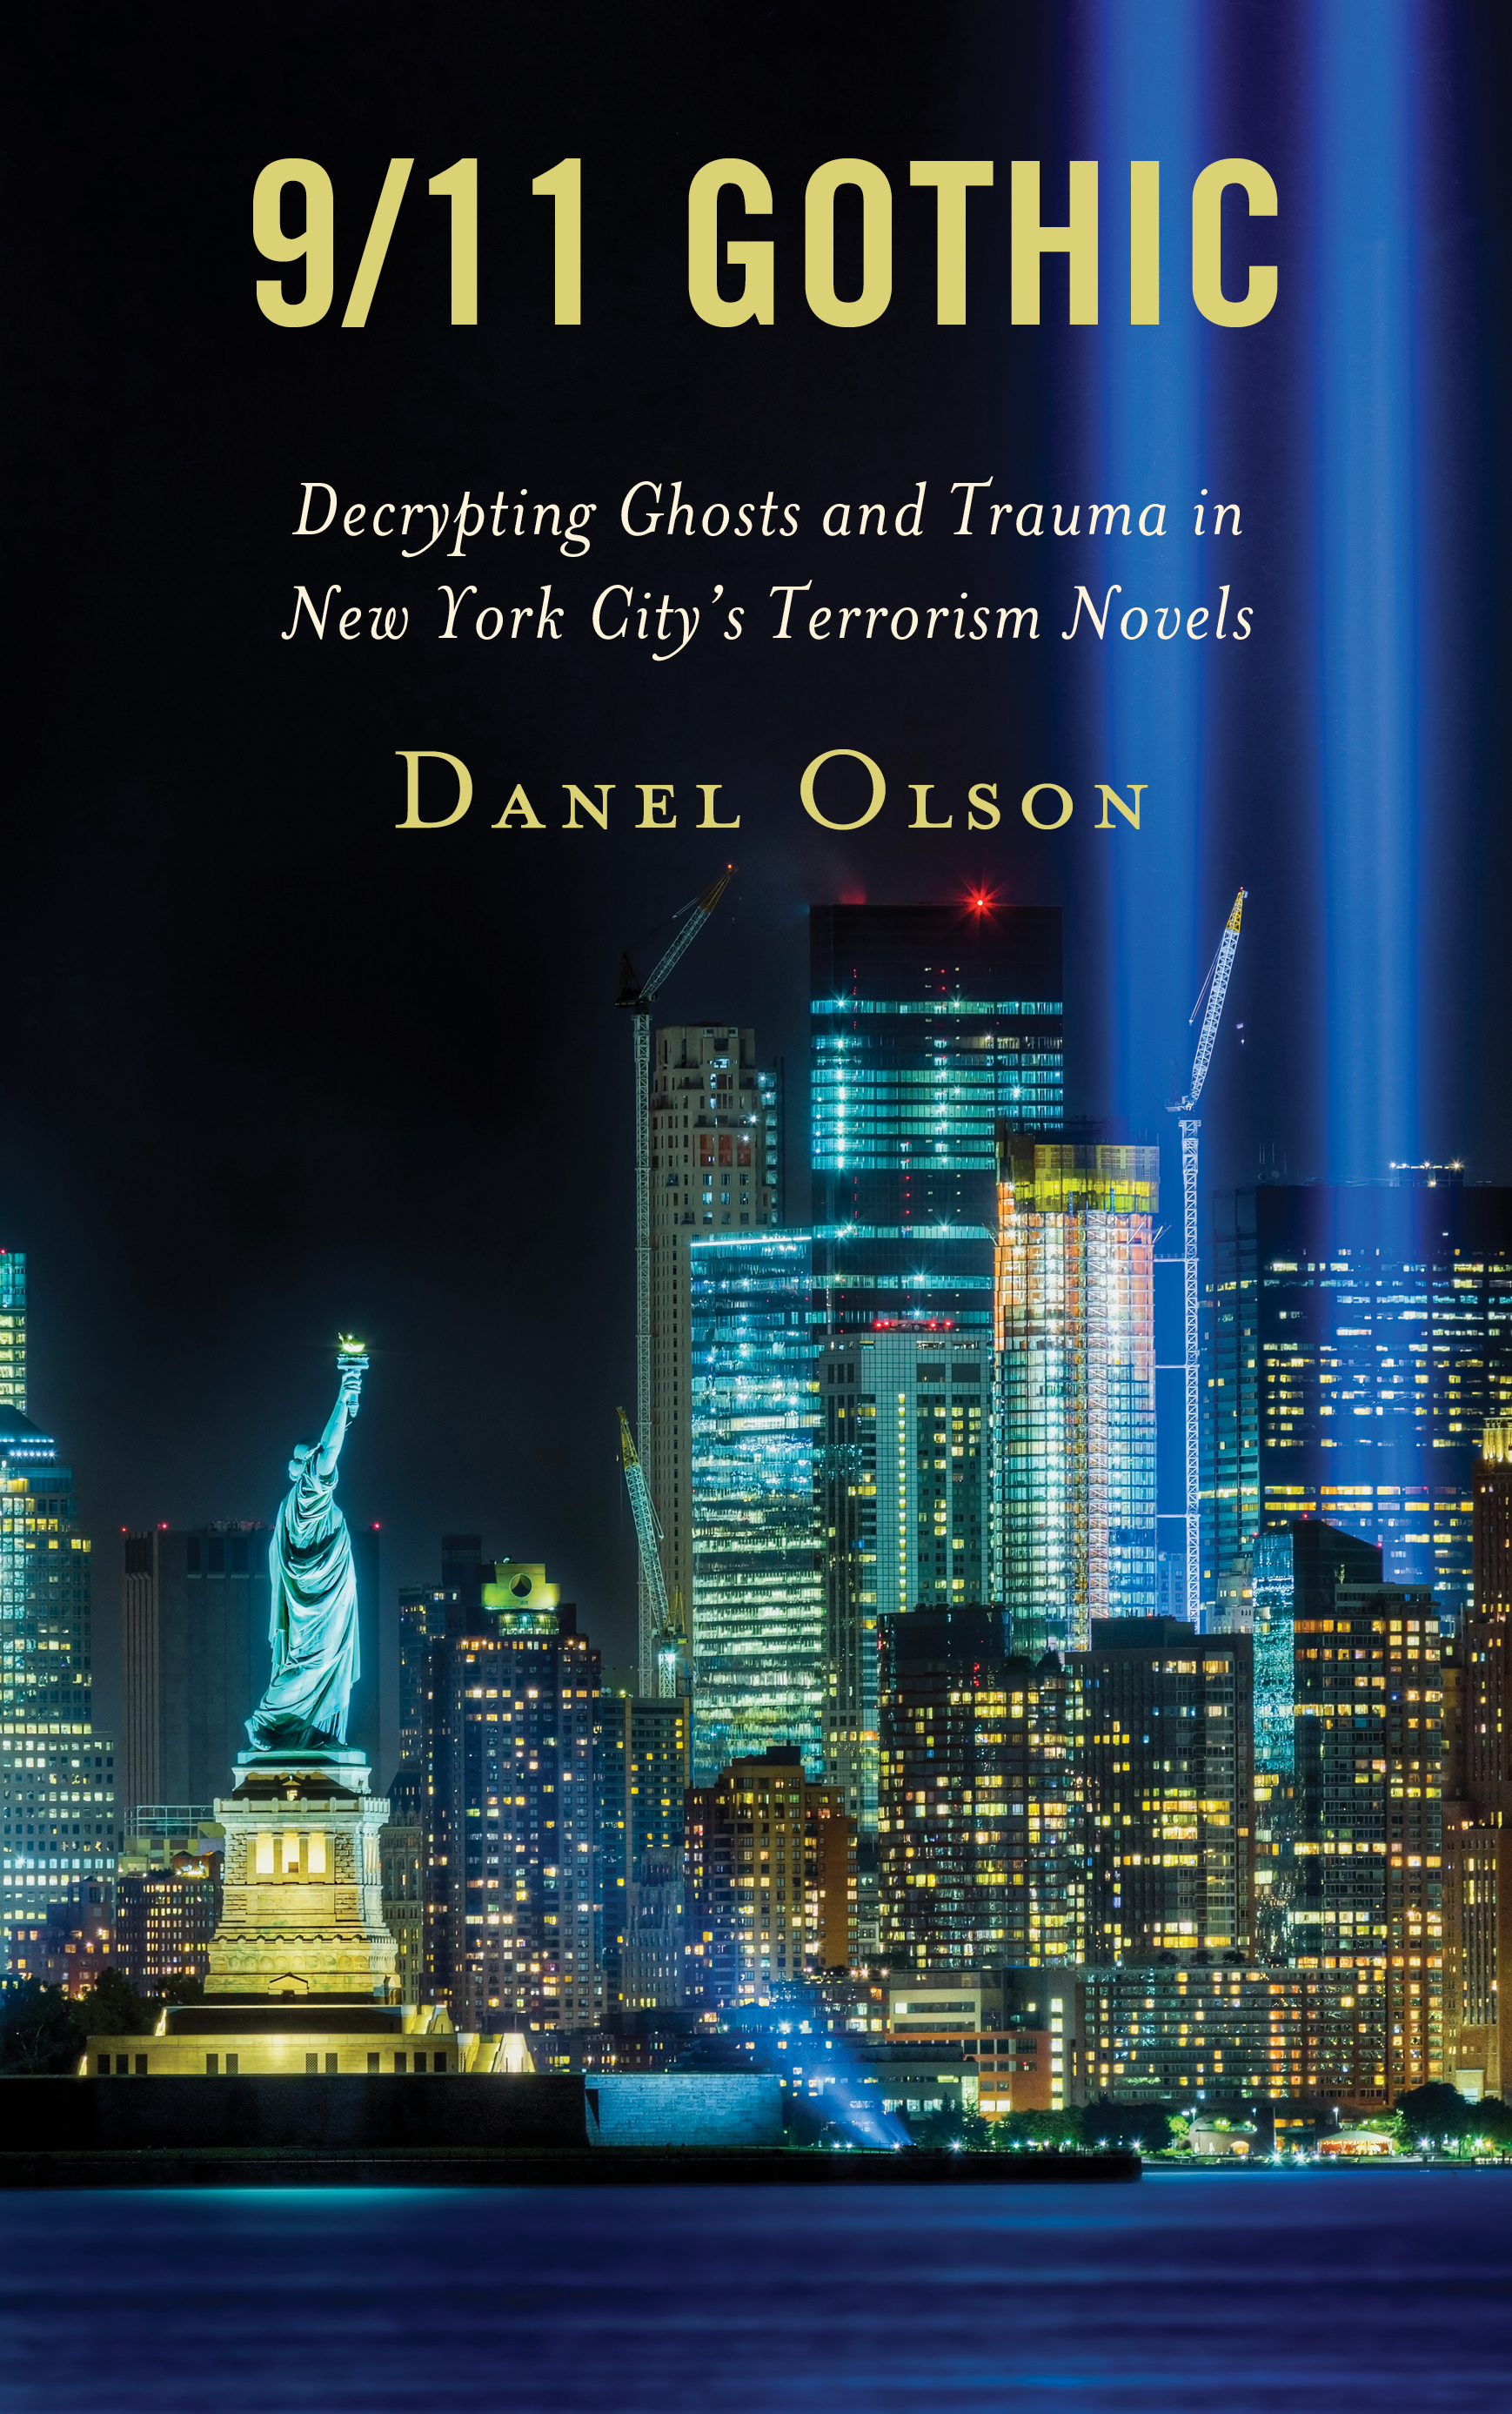 9/11 Gothic: Decrypting Ghosts and Trauma in New York City’s Terrorism Novels